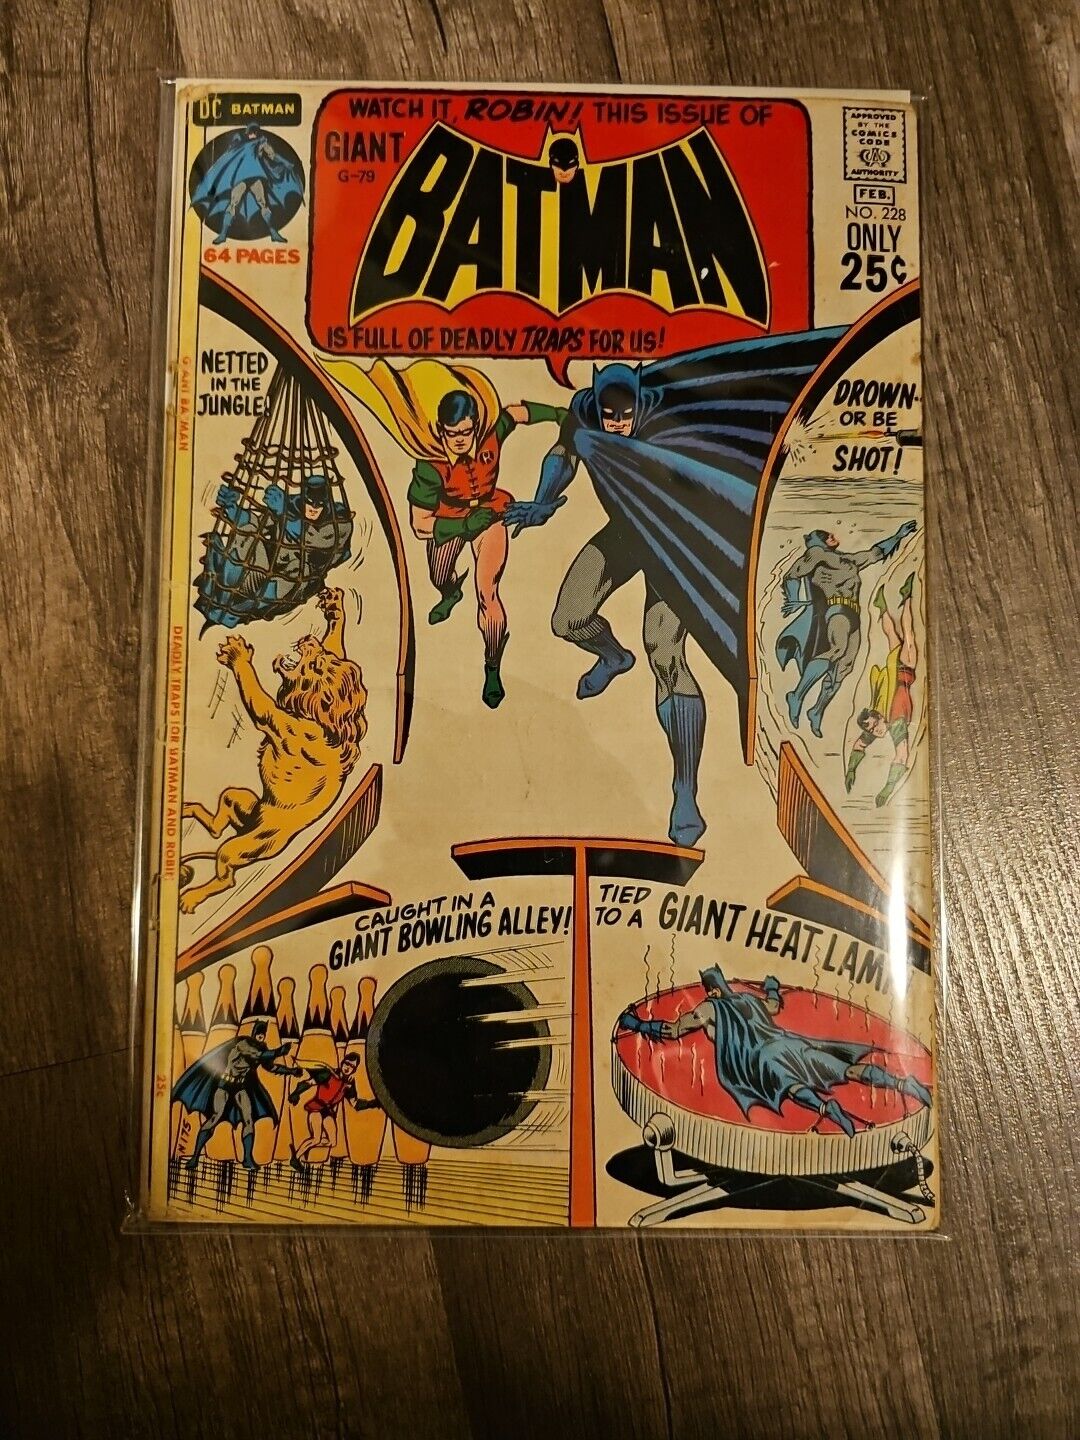 Batman #228 64 Page Giant Sized Issue DC Comics 1971